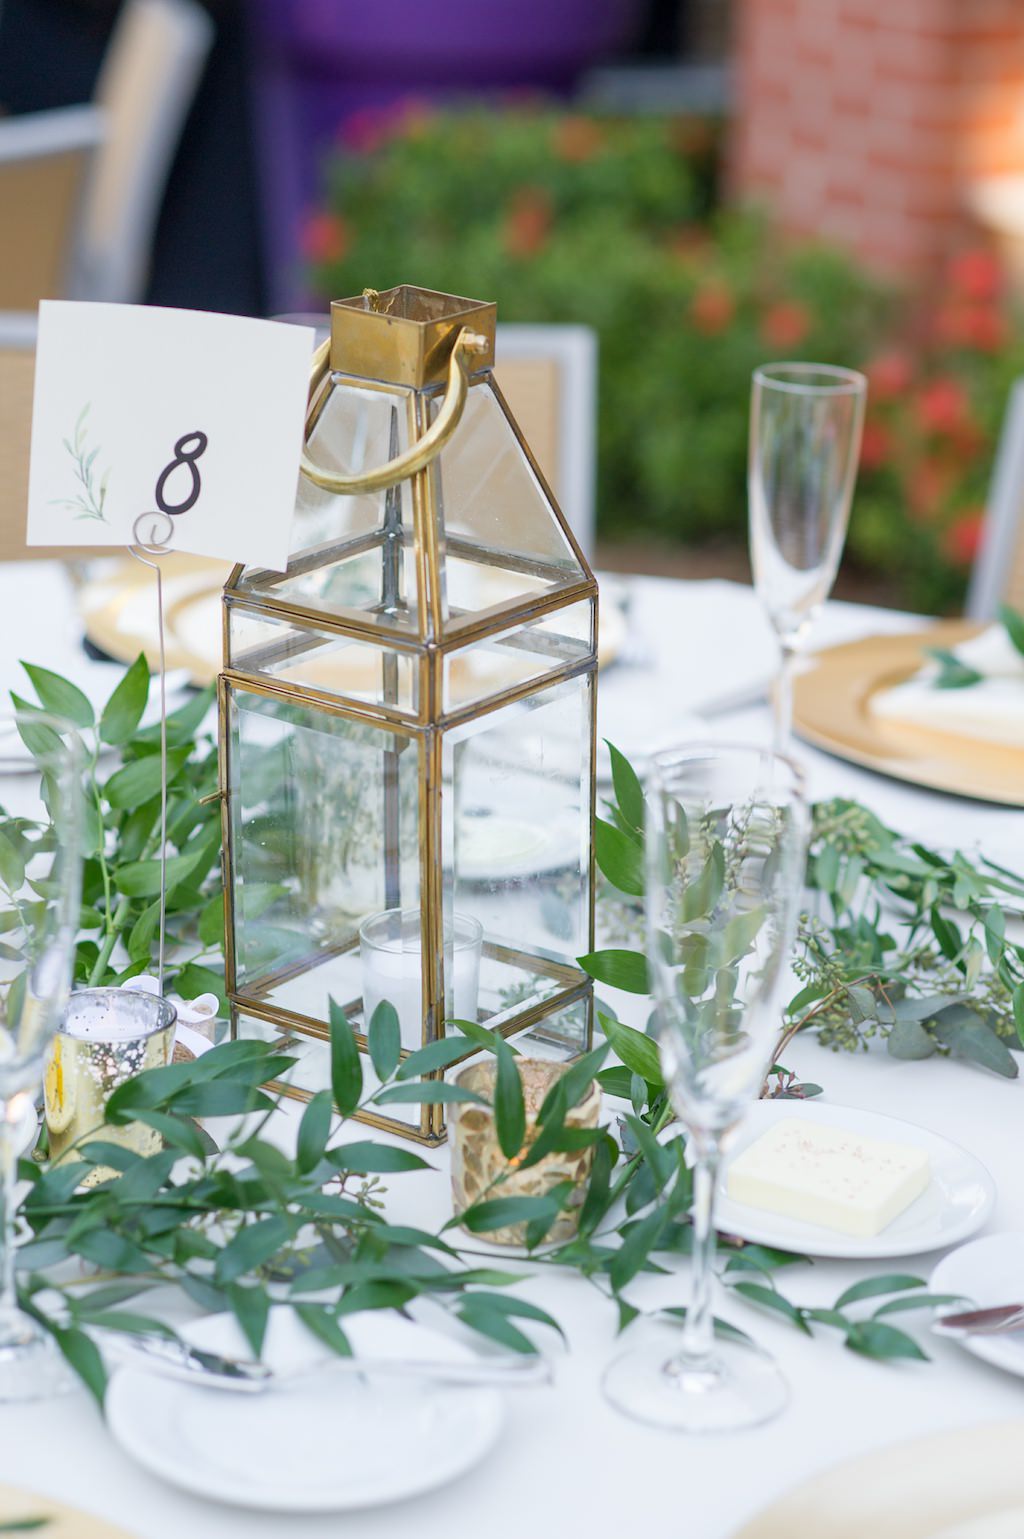 Simple Rustic Wedding Reception Round Table Centerpiece with Greenery, Vintage Gold and Glass Hurricane Lantern, and Handwritten Table Number on Printed Sage Card